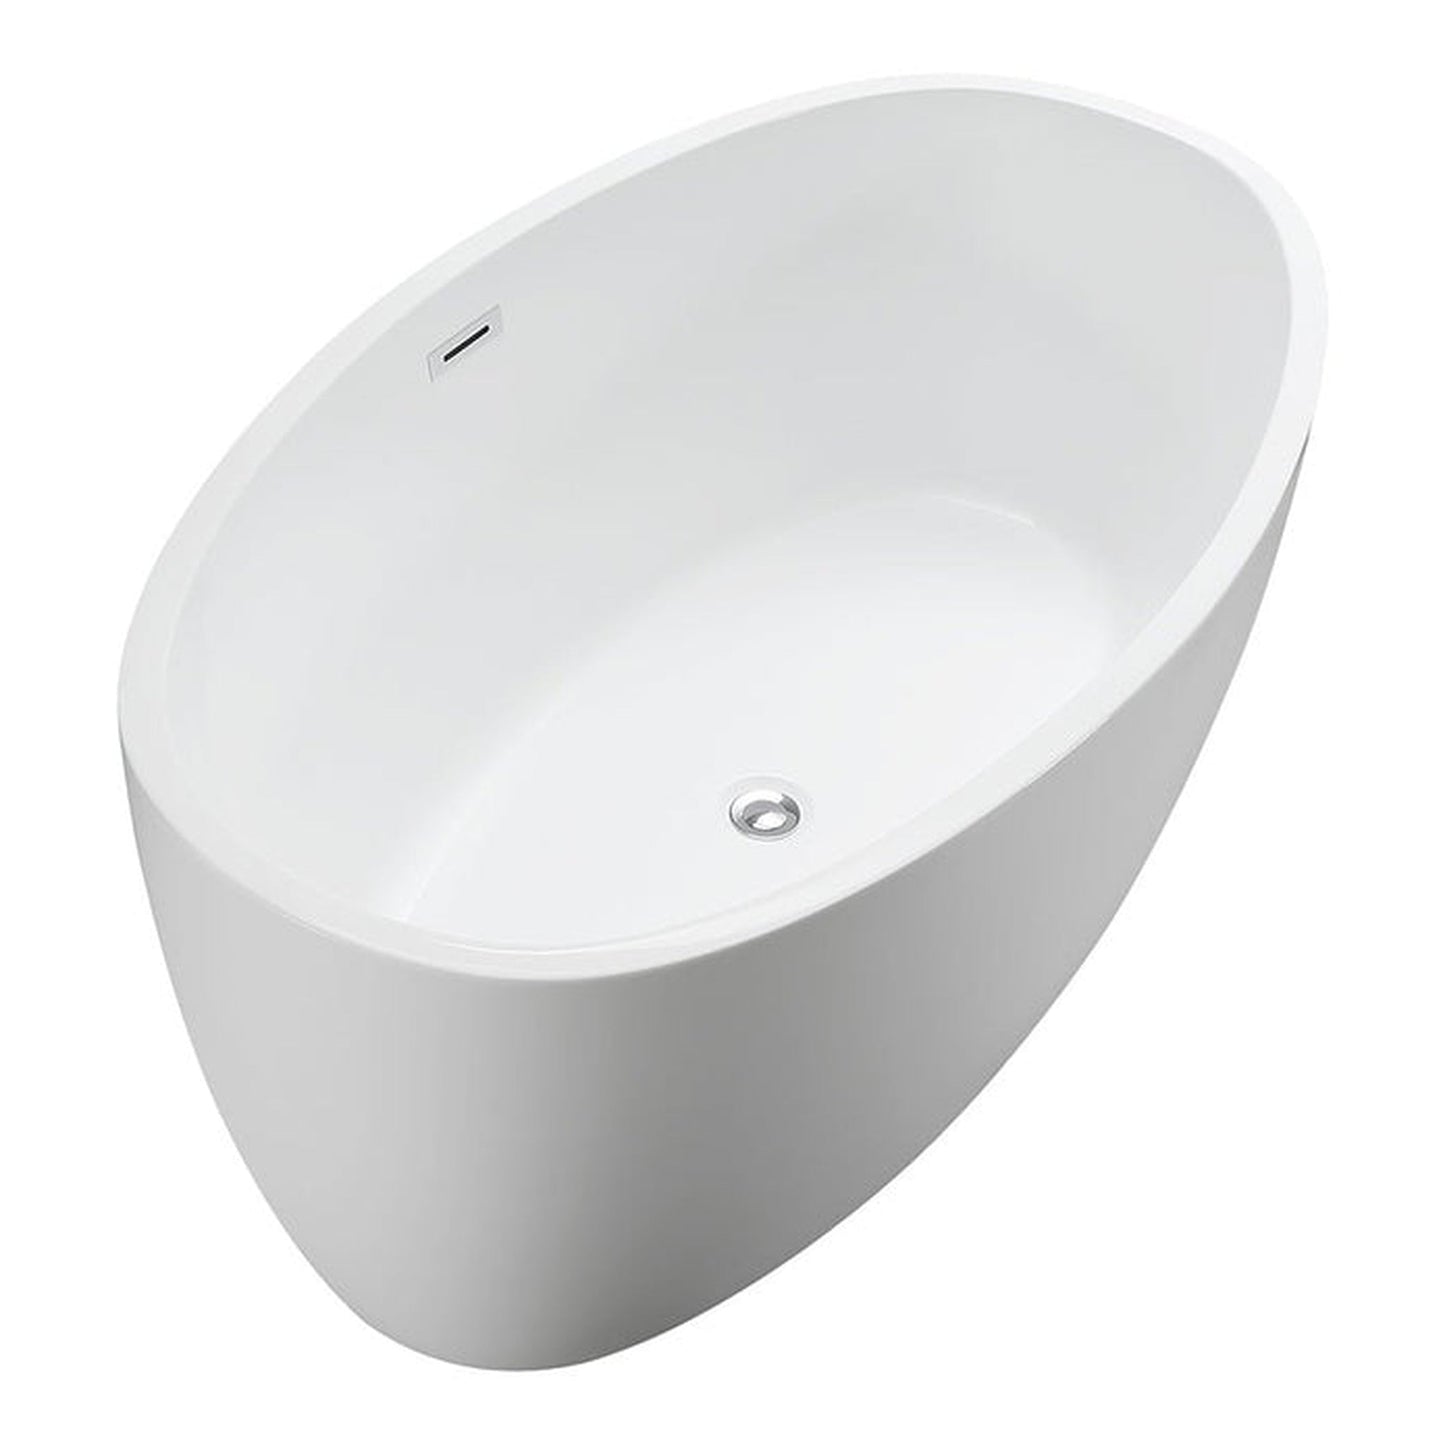 Vanity Art 69" x 40" White Modern Stand Alone Soaking Tub With Polished Chrome Slotted Overflow and Pop-up Drain